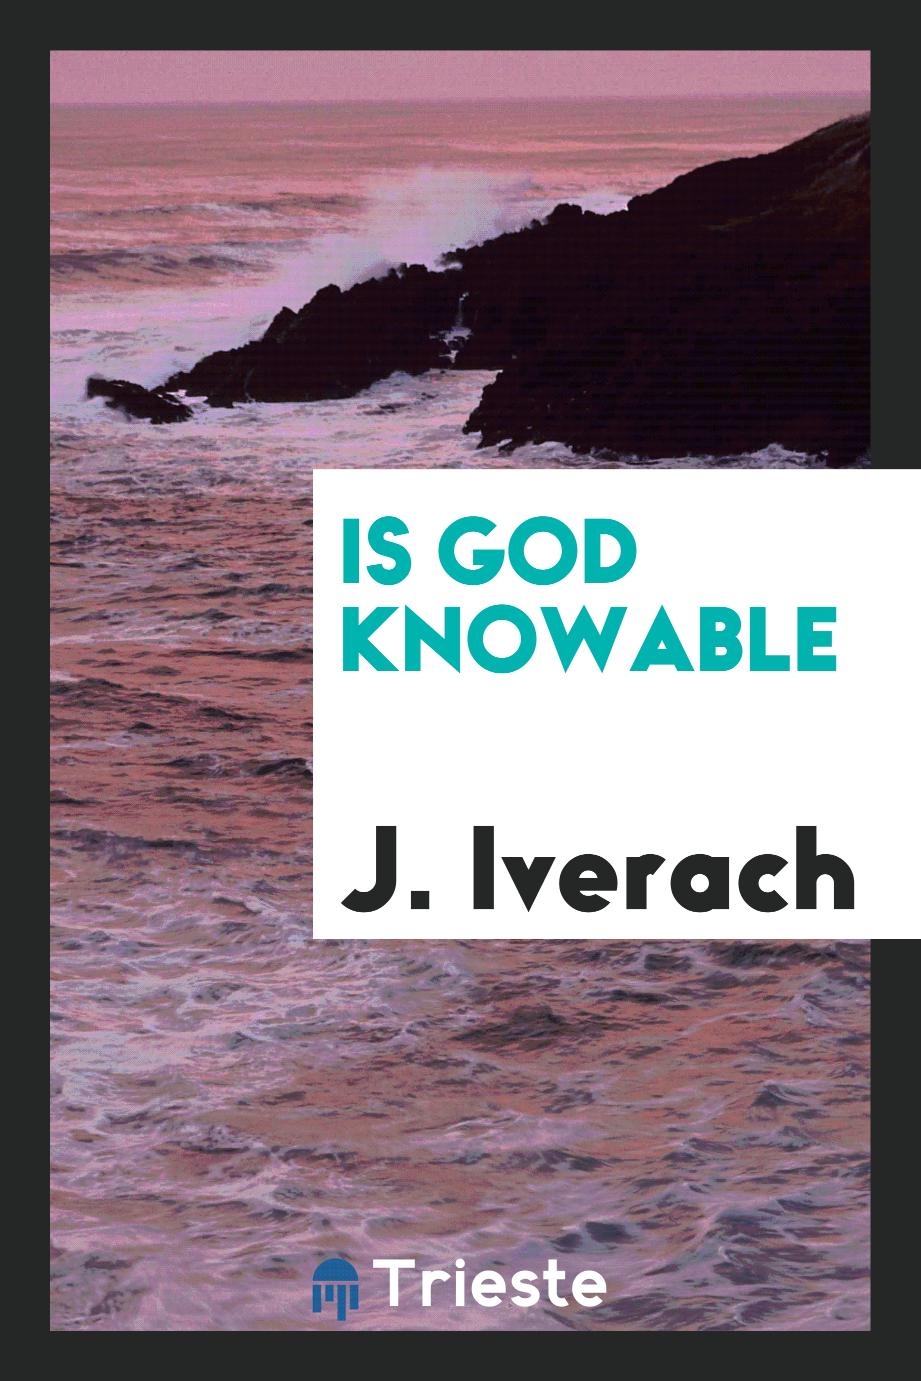 Is God knowable